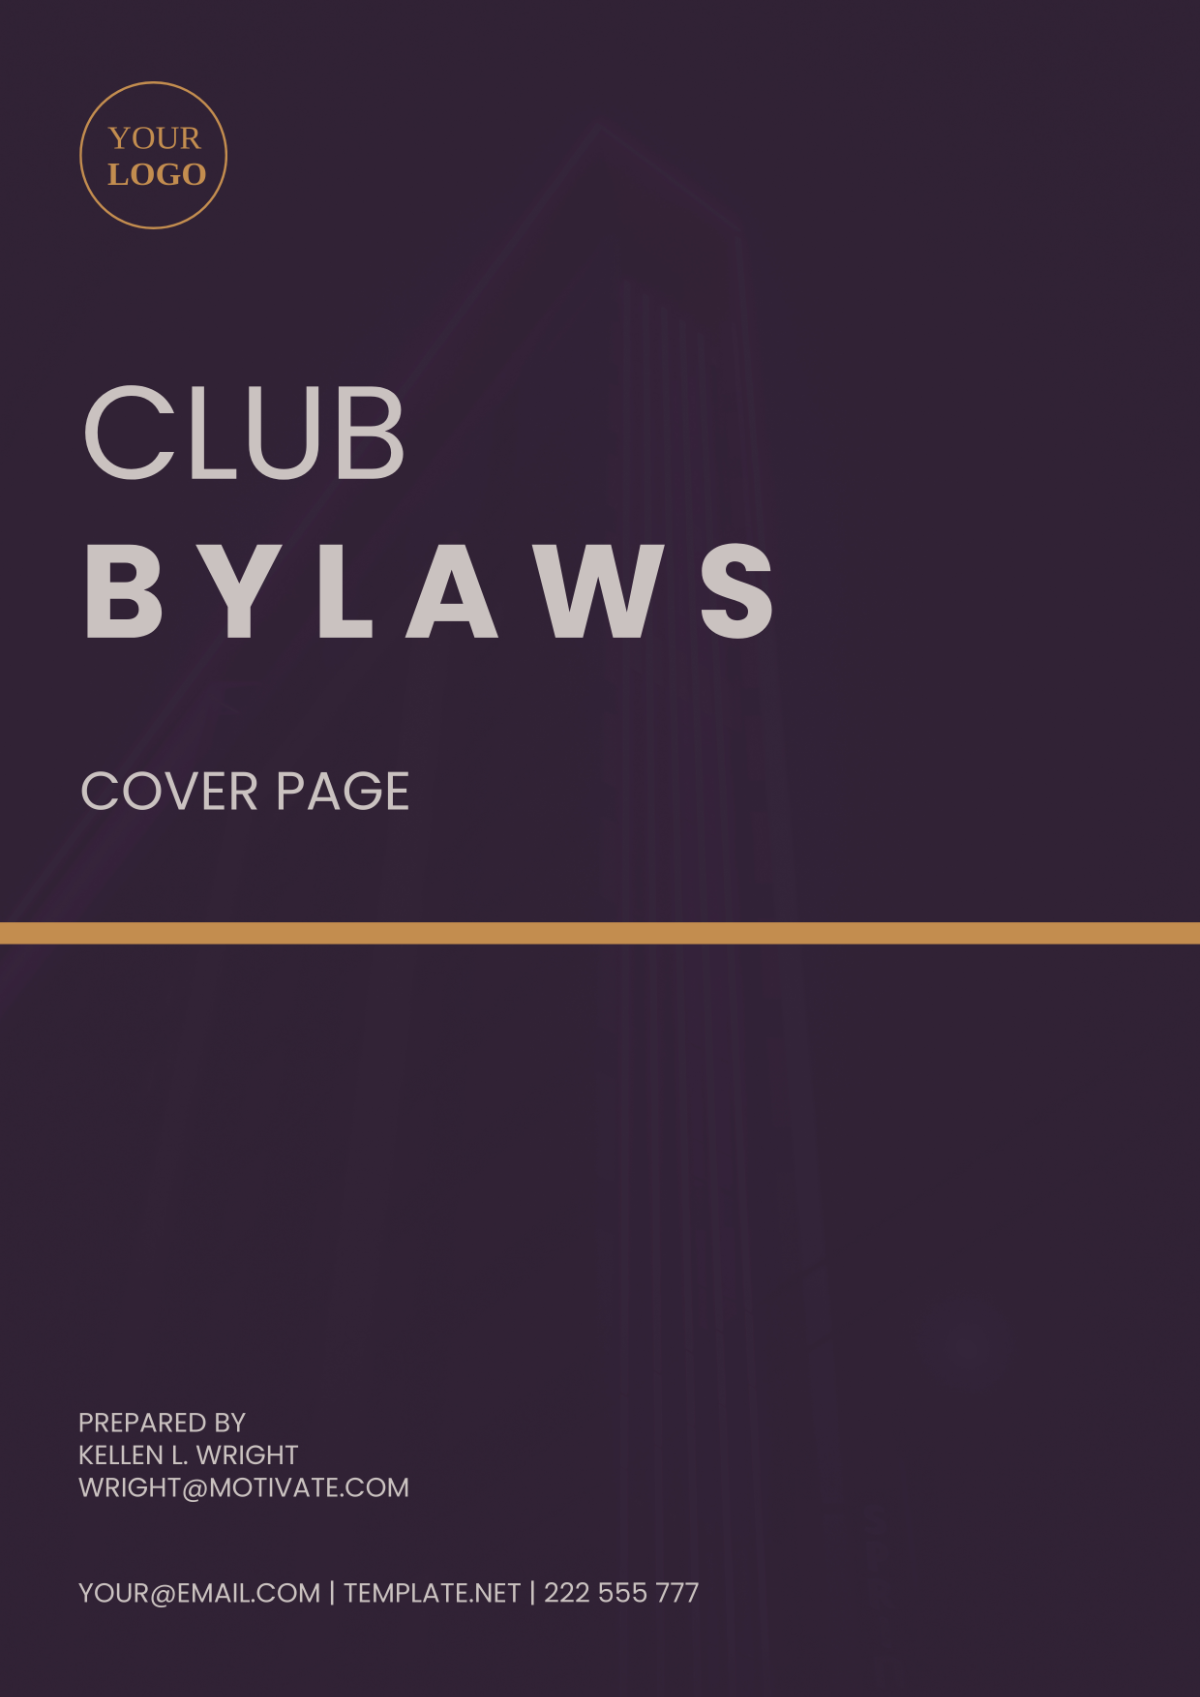 Club Bylaws Cover Page Template